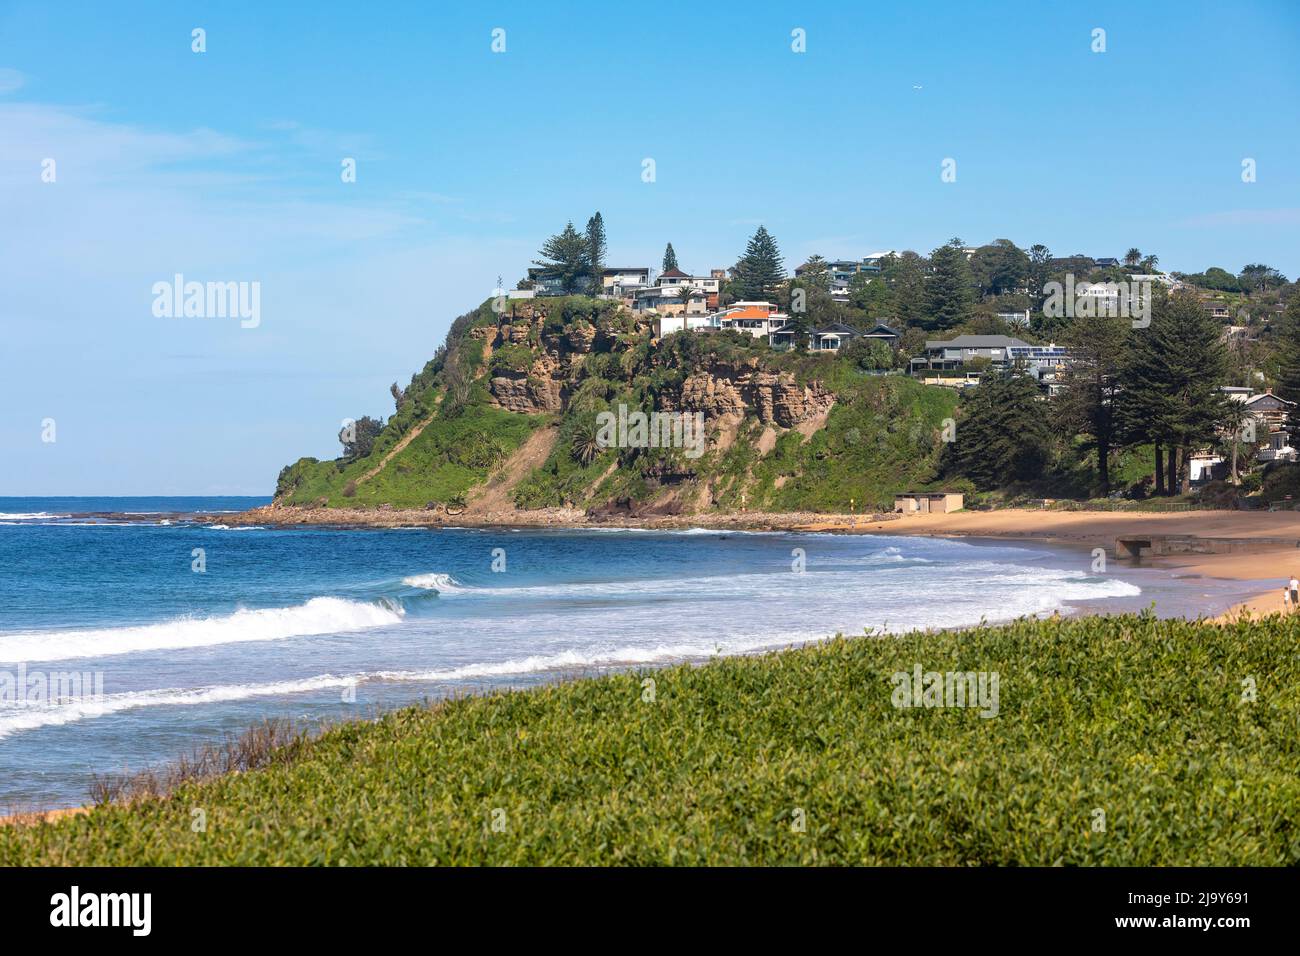 Newport Beach in Sydney, one of the northern beaches of Sydney with cliff top homes on Bungan headland,NSW,Australia Stock Photo